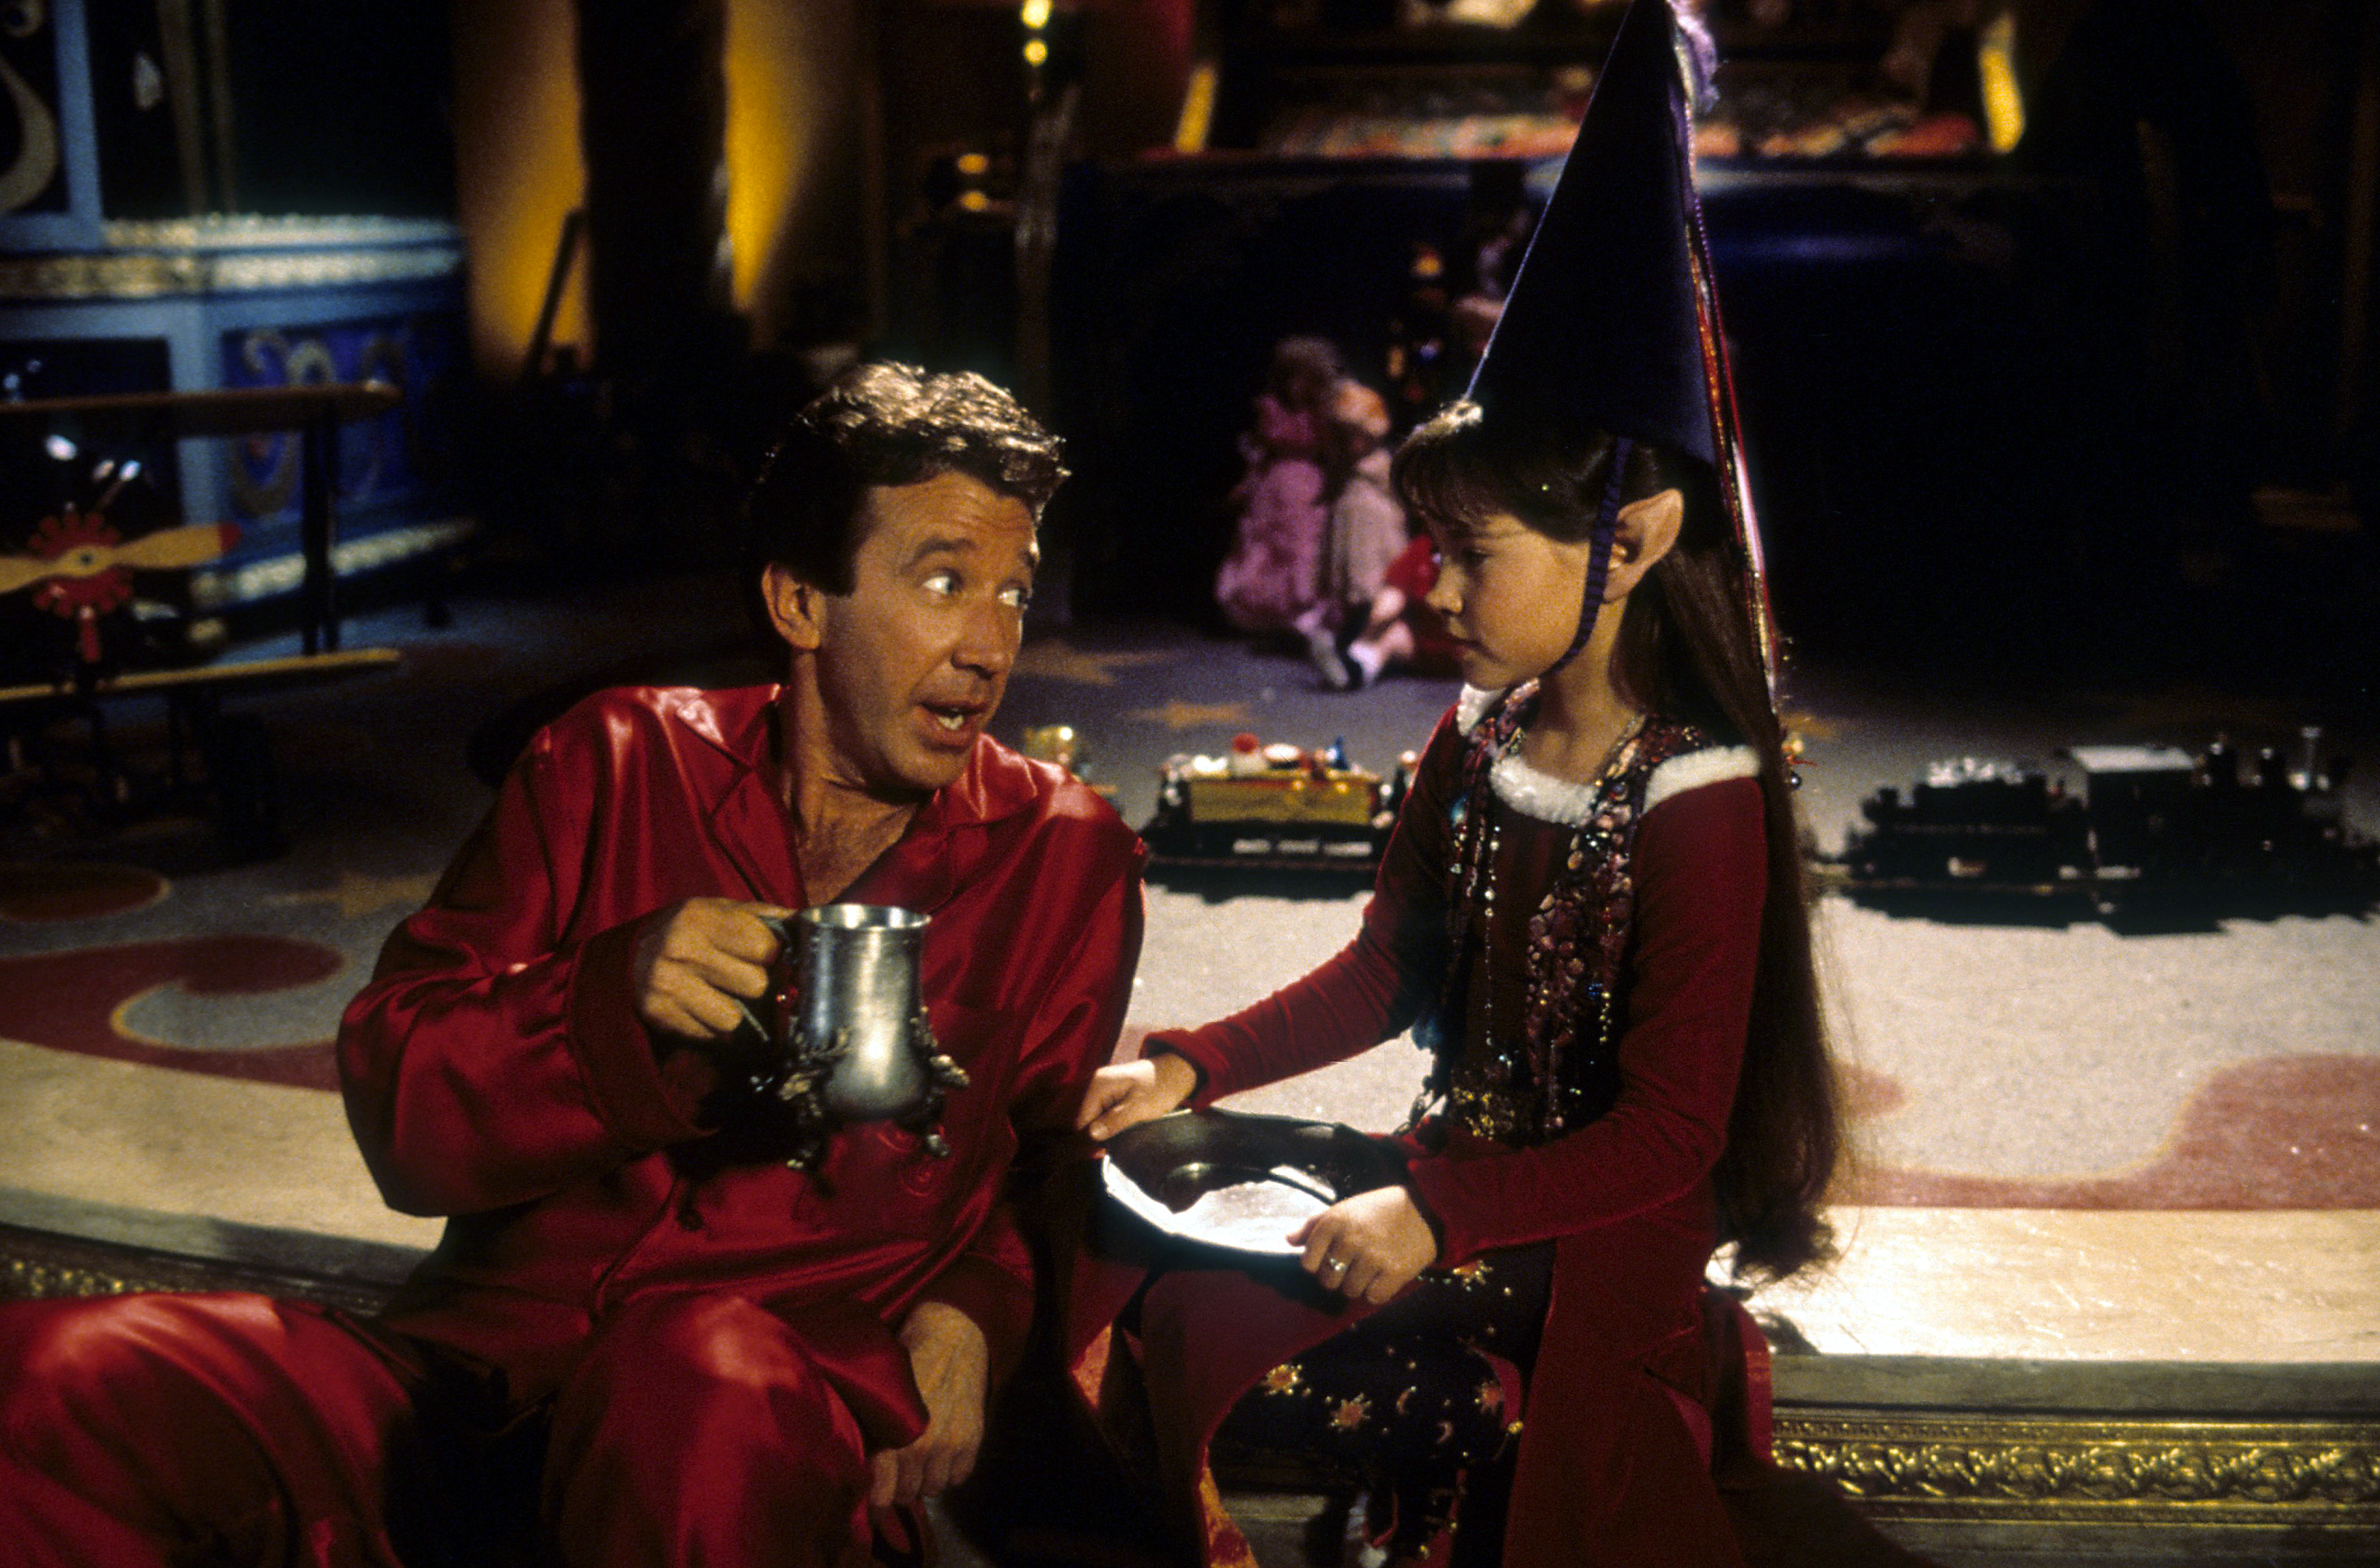 Tim Allen with Paige Tamada as Elf-Judy in a scene from "The Santa Clause" in 1994. | Source: Getty Images